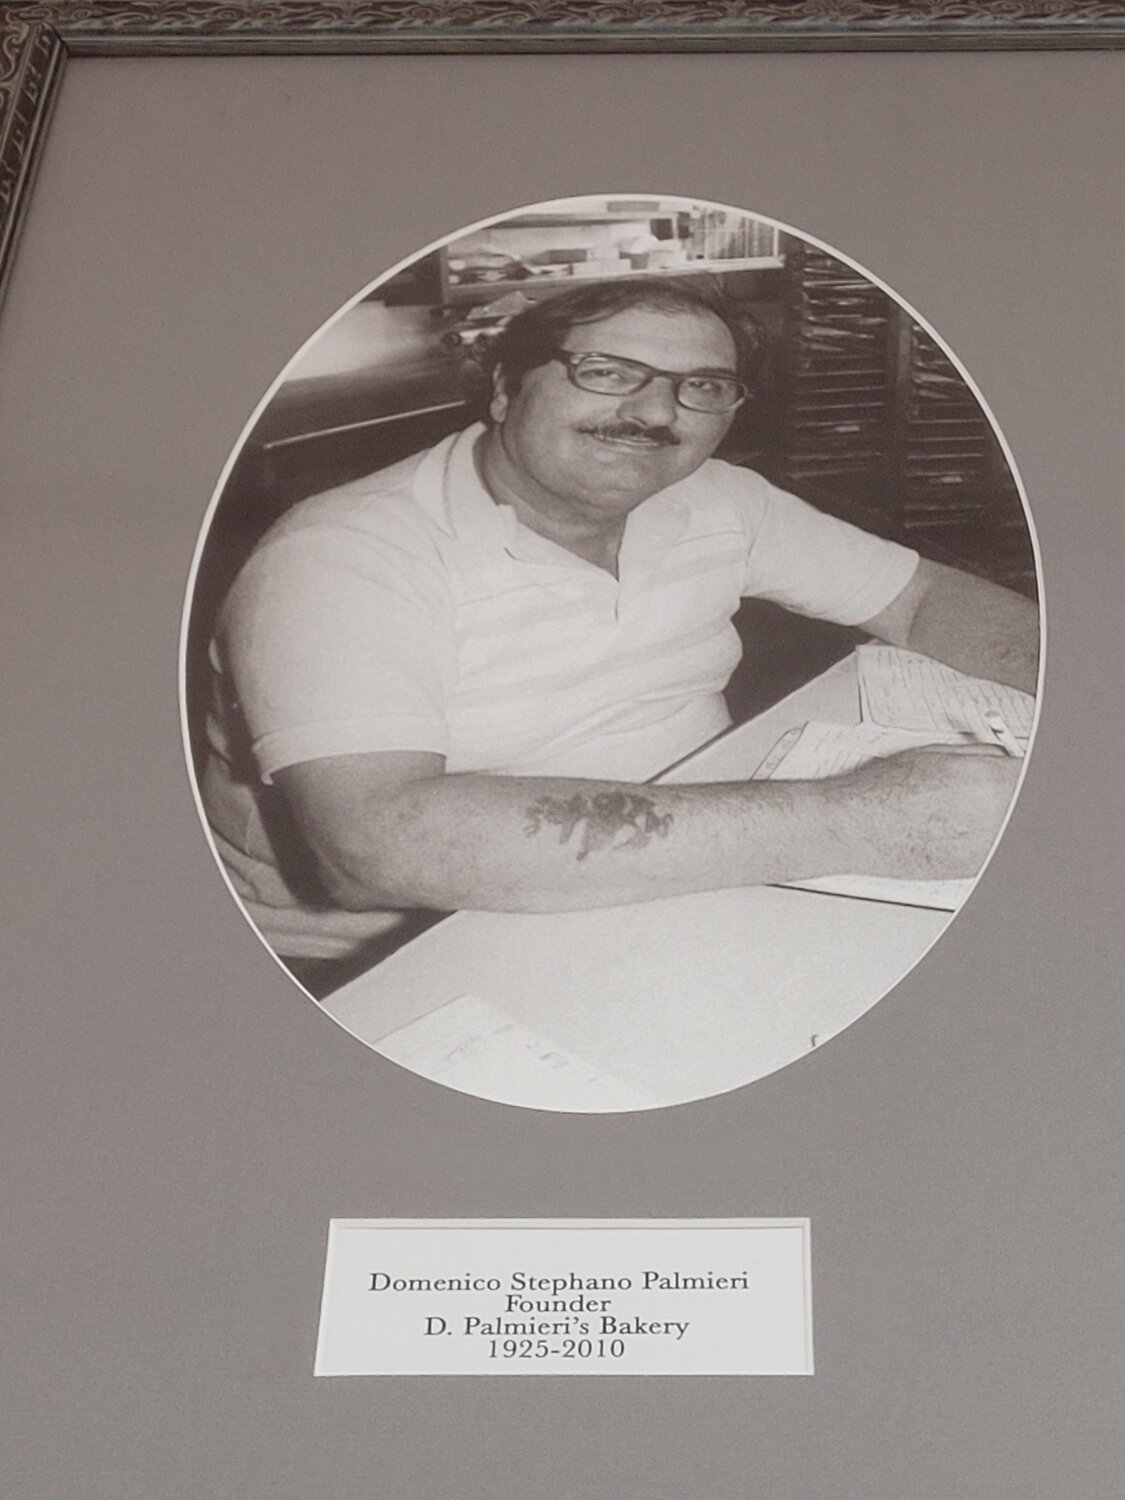 PIZZA PORTRAITS: Photographs of the founders of D. Palmieri’s Bakery in Johnston hang on the wall; master pizza makers forever watching their ancestors continue their craft, with the same, cherished, more than century-old recipes.